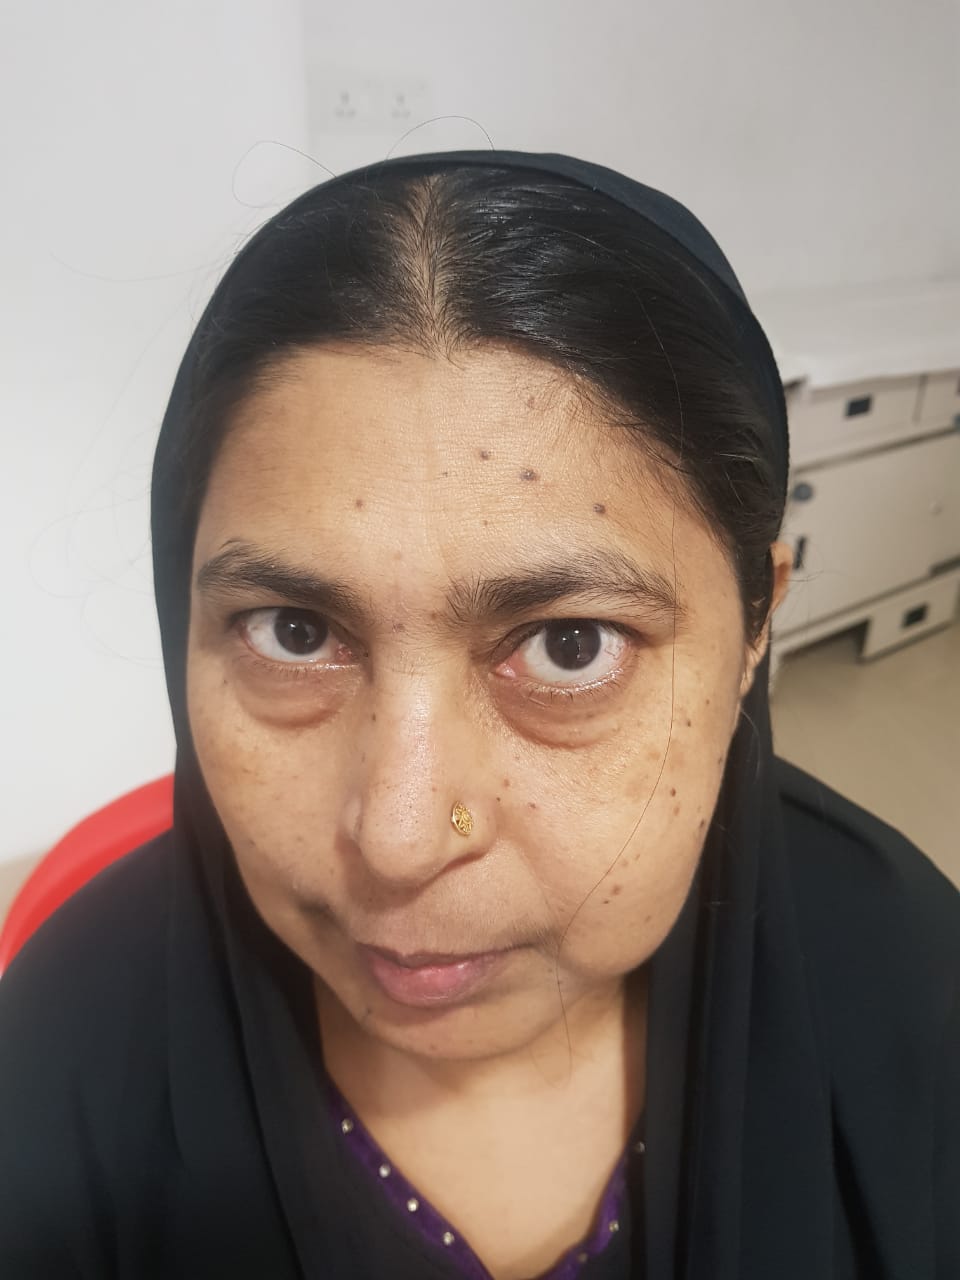 55-year-old-woman-with-rare-maxillary-nerve-schwannoma-successfully-treated-by-the-doctors